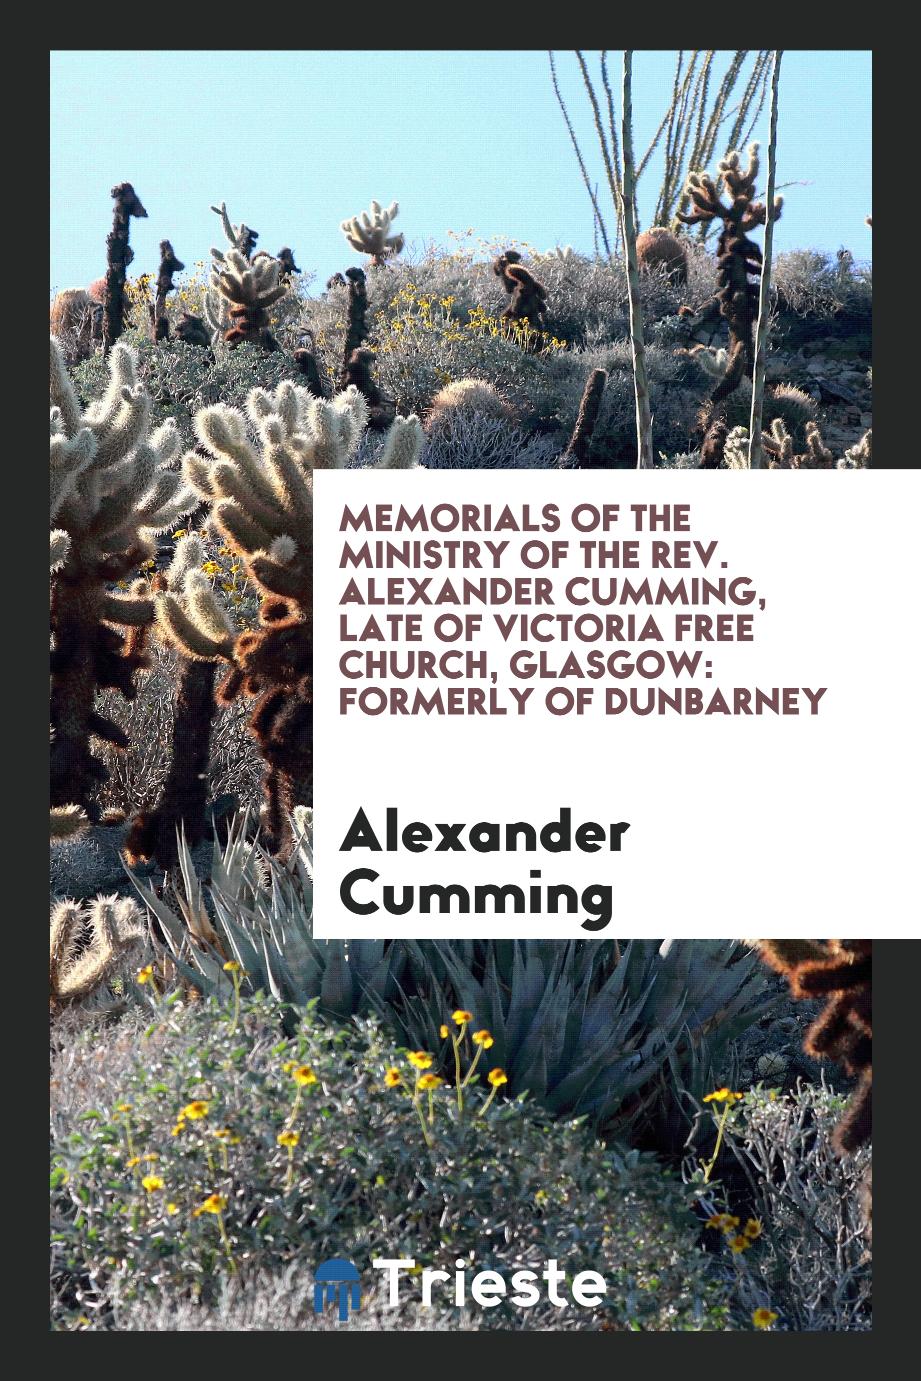 Memorials of the Ministry of the Rev. Alexander Cumming, Late of Victoria Free Church, Glasgow: Formerly of Dunbarney